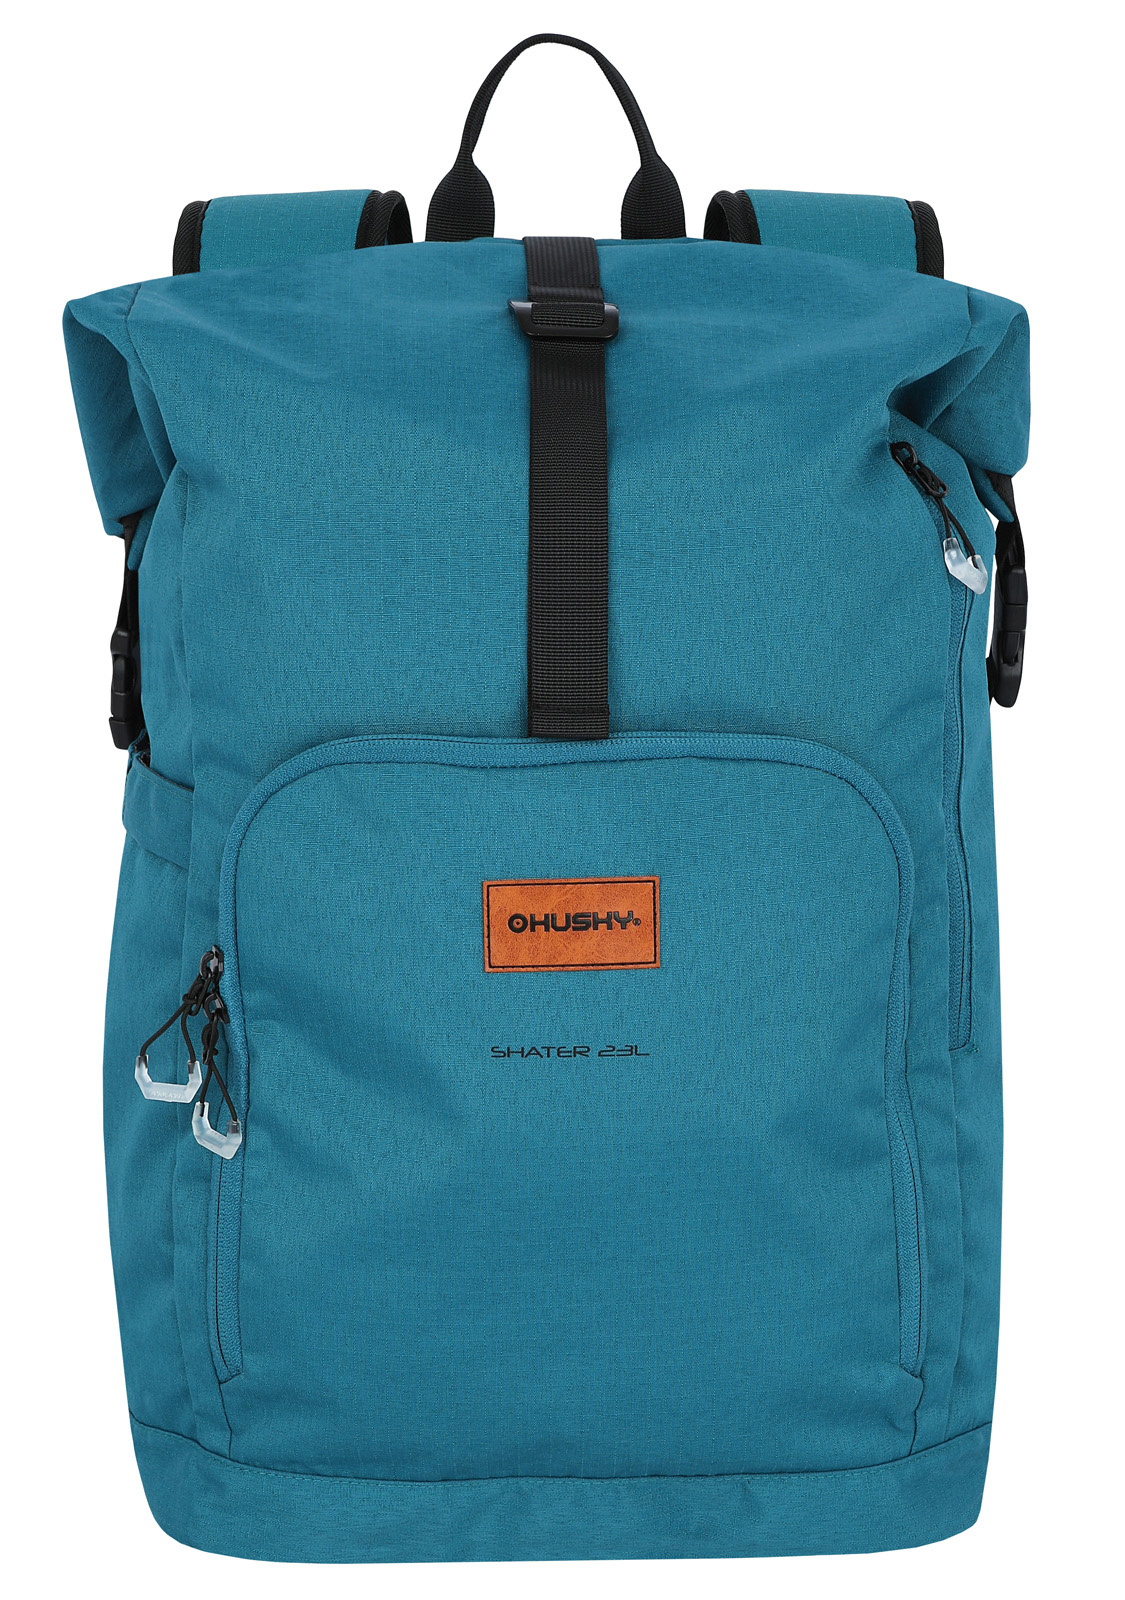 Backpack Office HUSKY Shater 23l turquoise